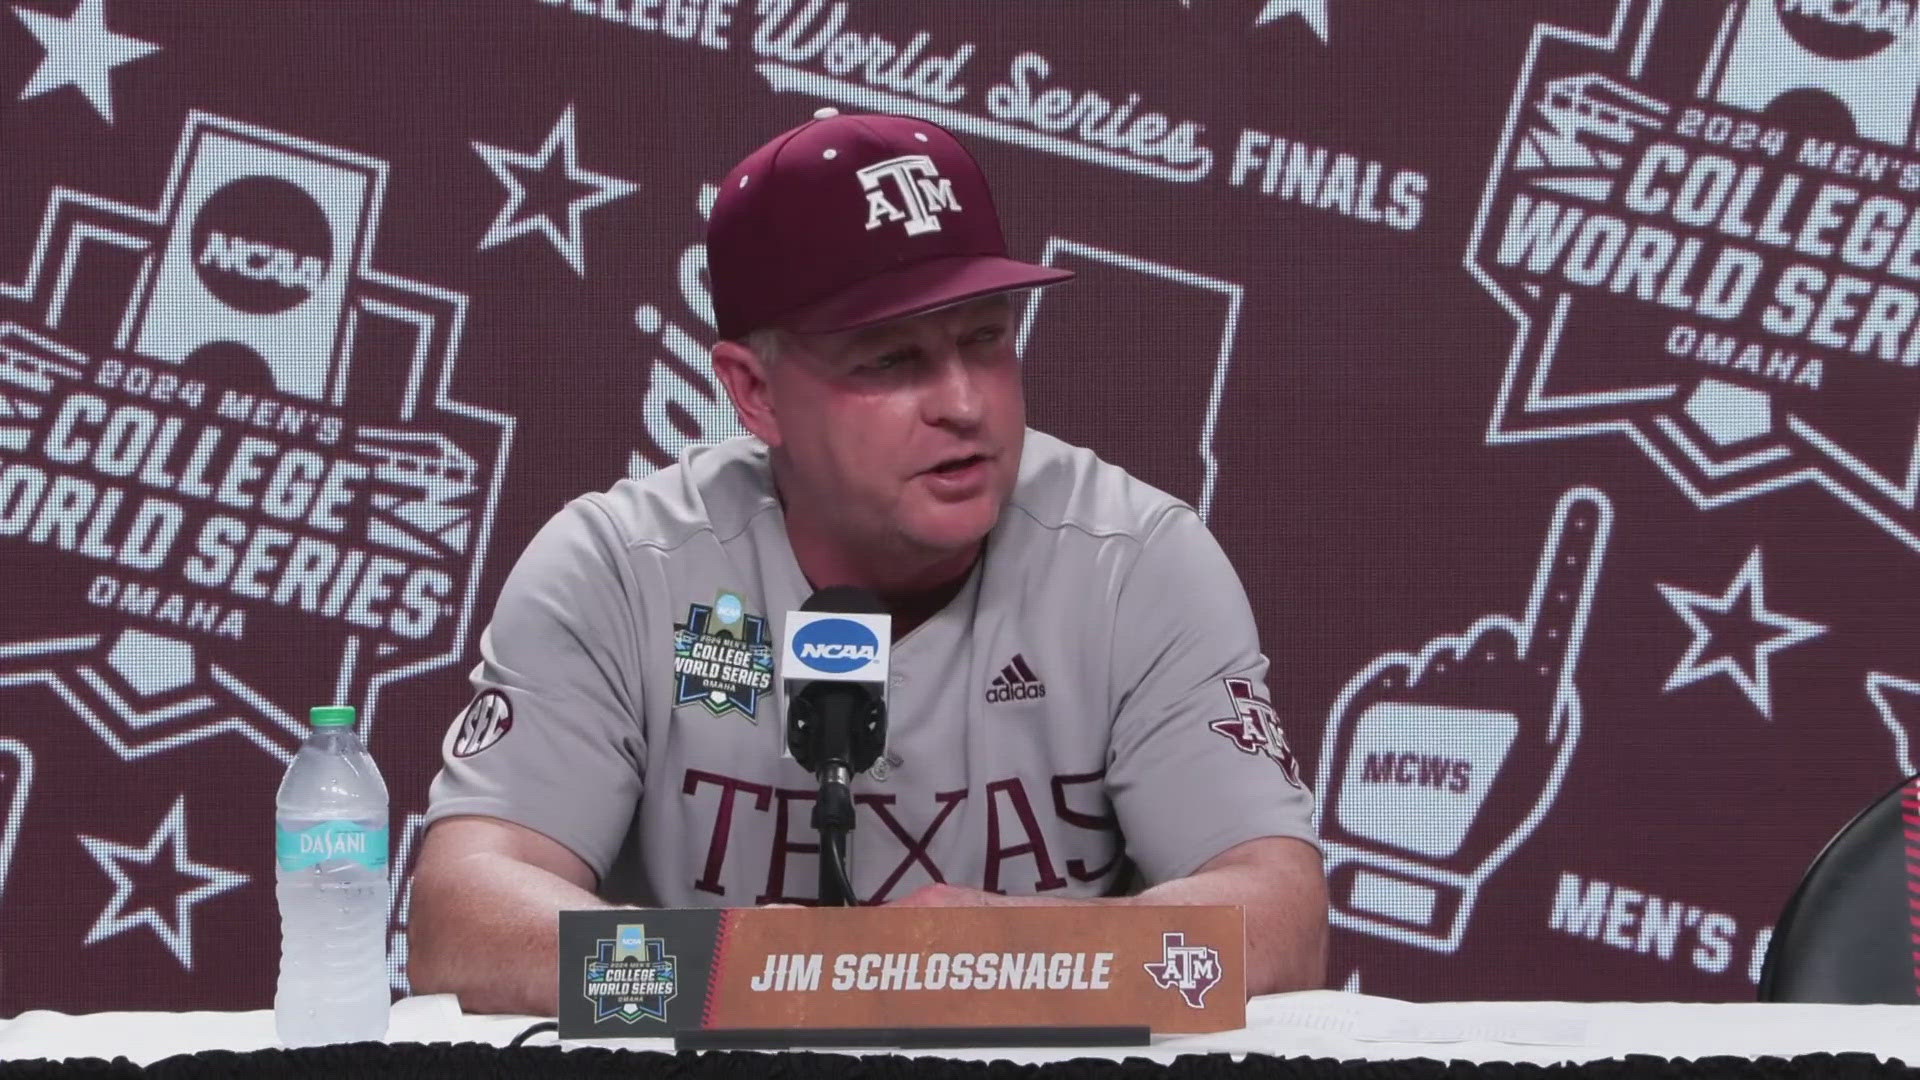 Schlossnagle's comments Monday night that he "took the job at Texas A&M to never take another job again" appear to have not been fully true.